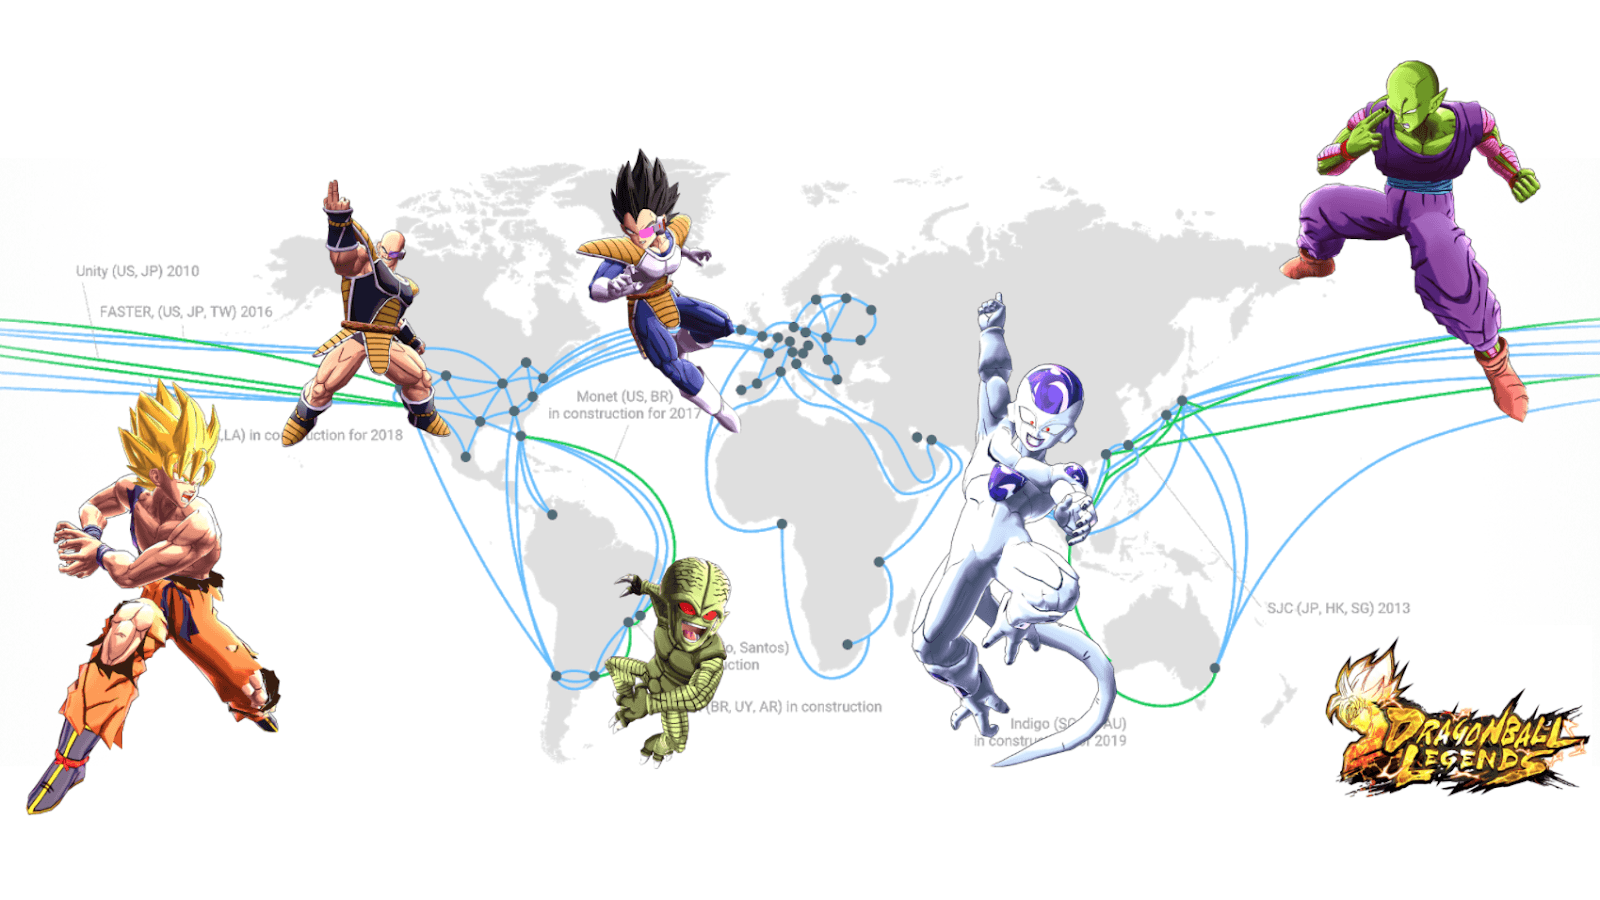 Google Cloud Platform Blog: Behind the scenes with the Dragon Ball